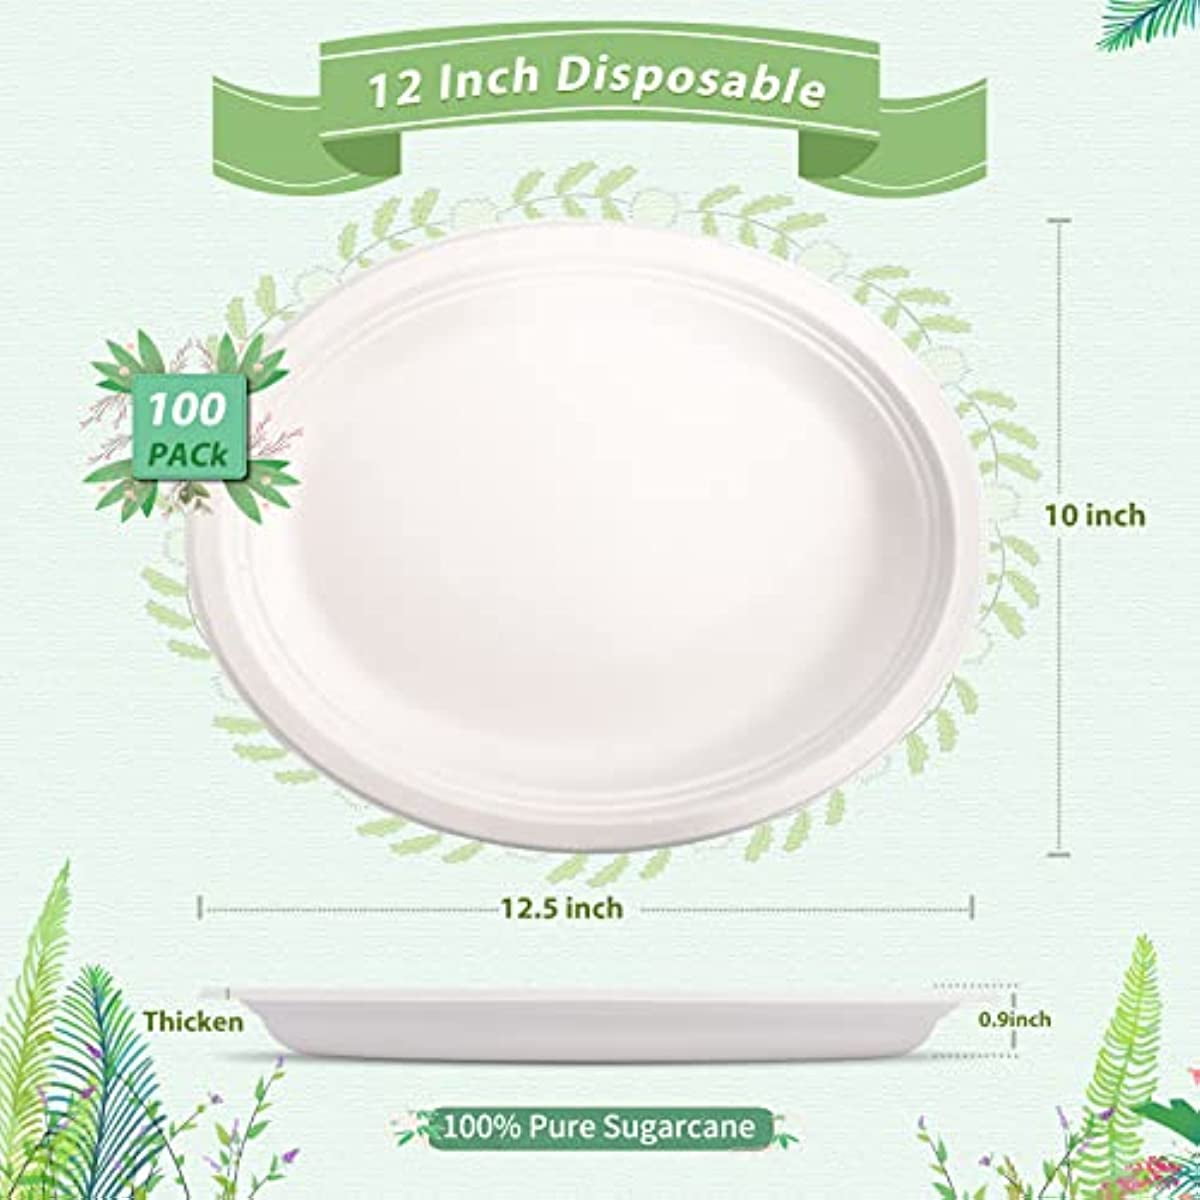 100% Compostable Oval Paper Plates 12.5 inch - 50-Pack Elegant Disposable  Dinner Platter Heavy-Duty Quality, Natural Bagasse Unbleached Eco-Friendly  Made of Sugar Cane Fibers, 12.5 x 10 Platter